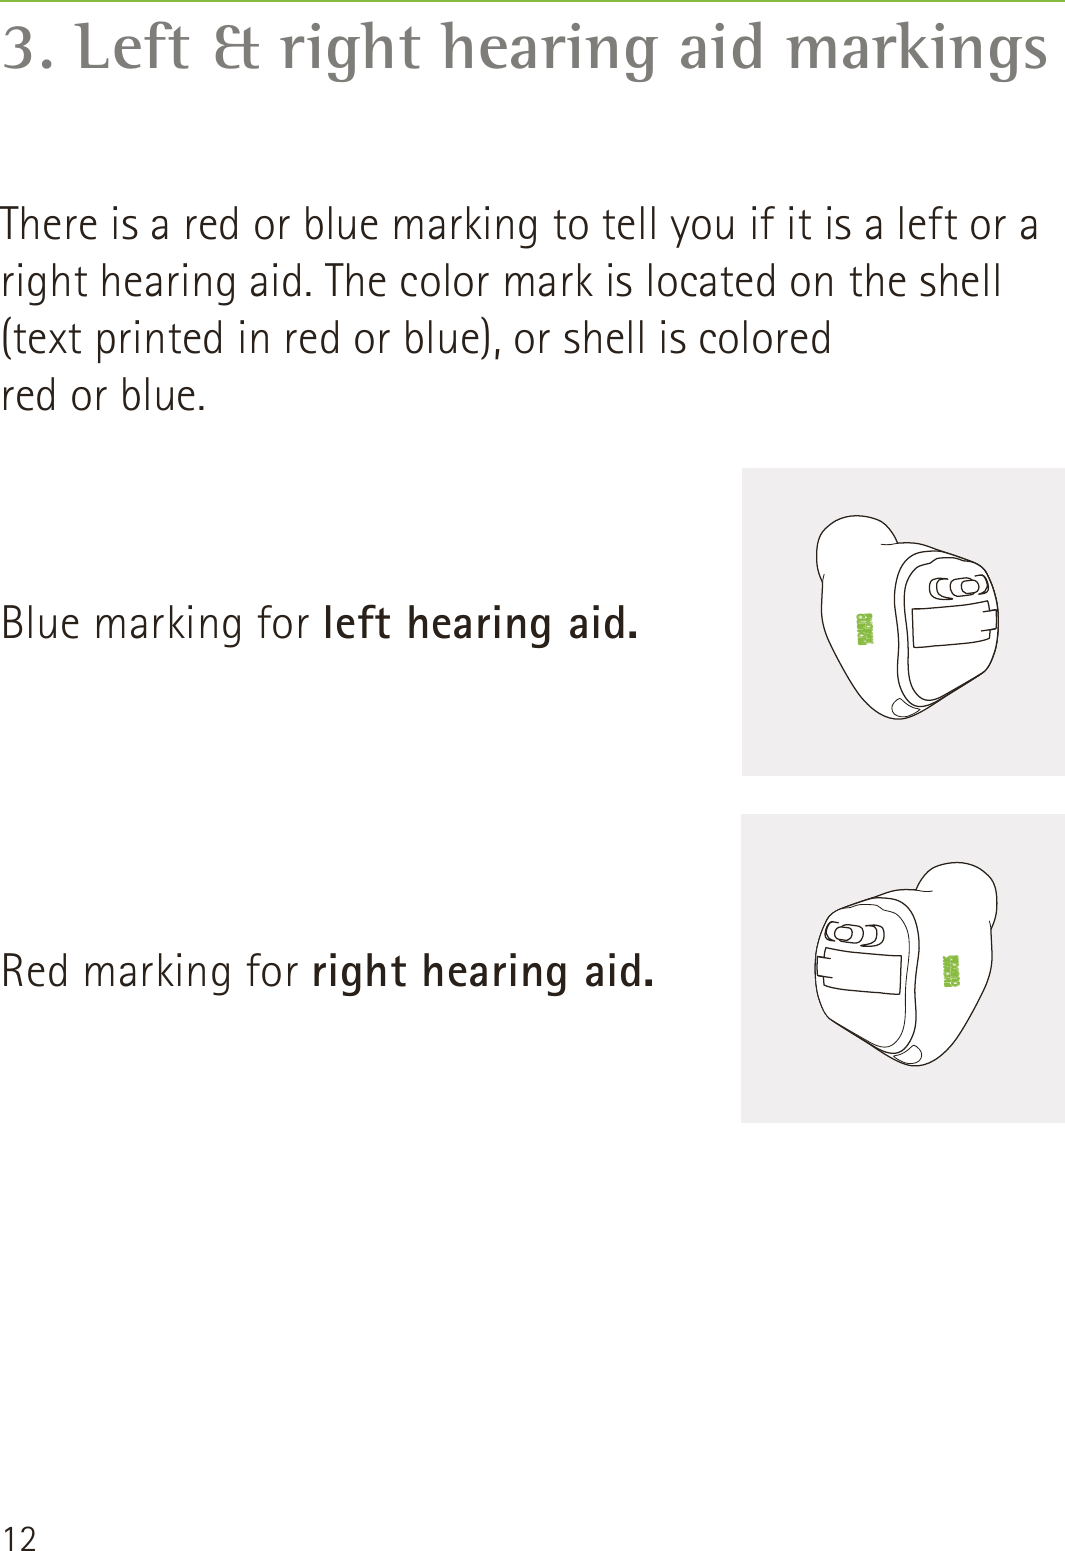 123. Left &amp; right hearing aid markingsThere is a red or blue marking to tell you if it is a left or a right hearing aid. The color mark is located on the shell (text printed in red or blue), or shell is colored  red or blue.Blue marking for left hearing aid.Red marking for right hearing aid.